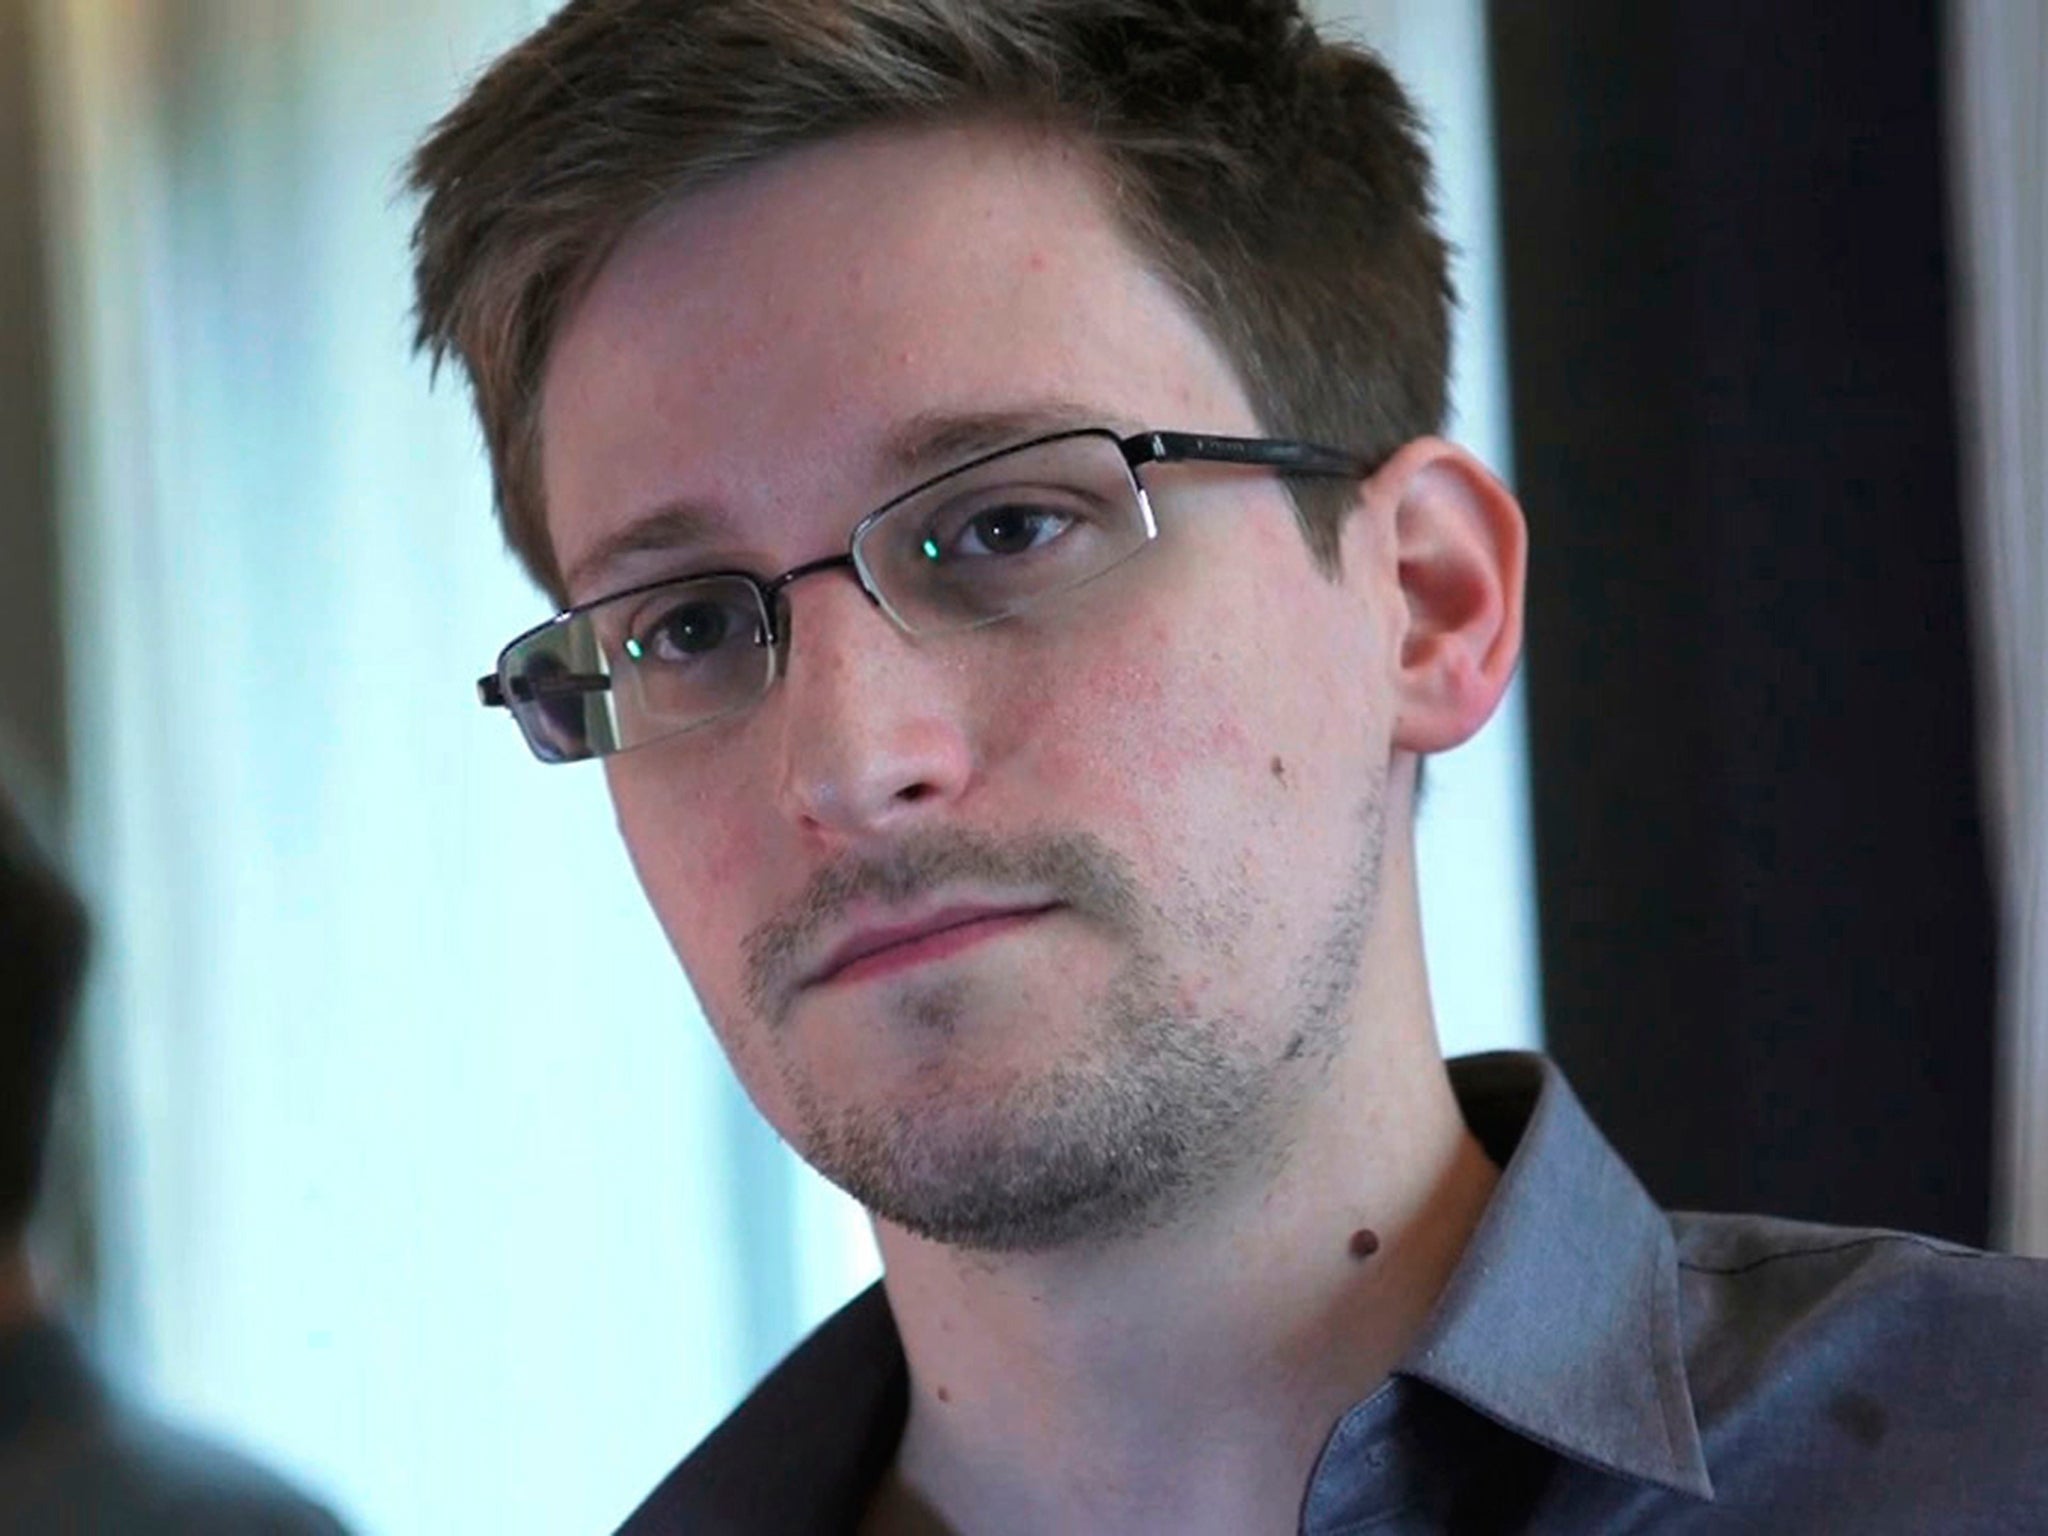 Edward Snowden, who leaked classified information from the US intelligence services in 2013, is living in Russia 